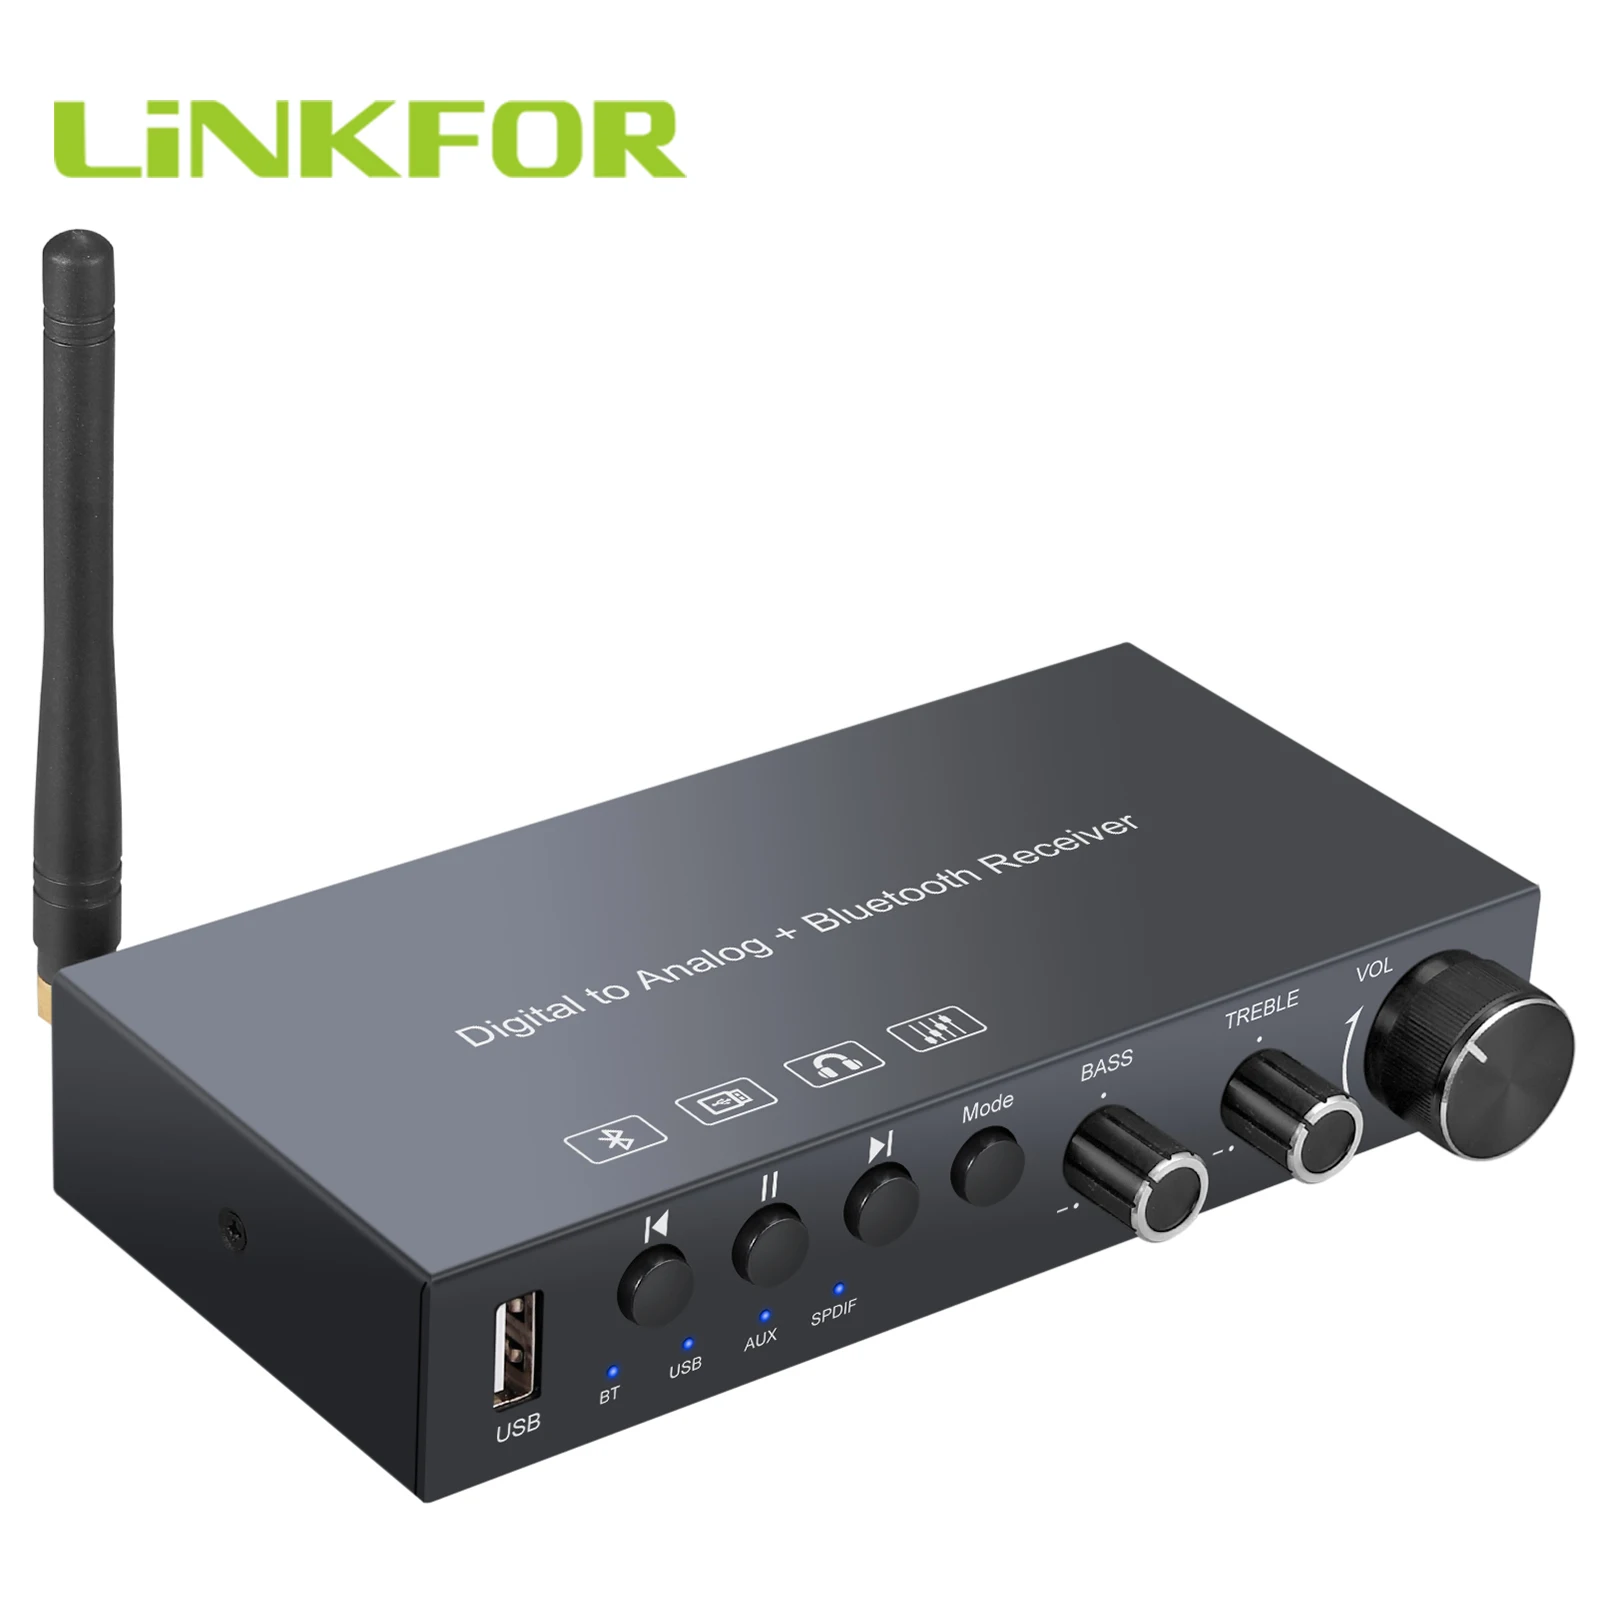 LiNKFOR 192KHz DAC Bluetooth Receiver 4-in-1 Digital Aux USB to Analogue Converter 3.5 mm RCA Audio Adapter Volume Bass Control